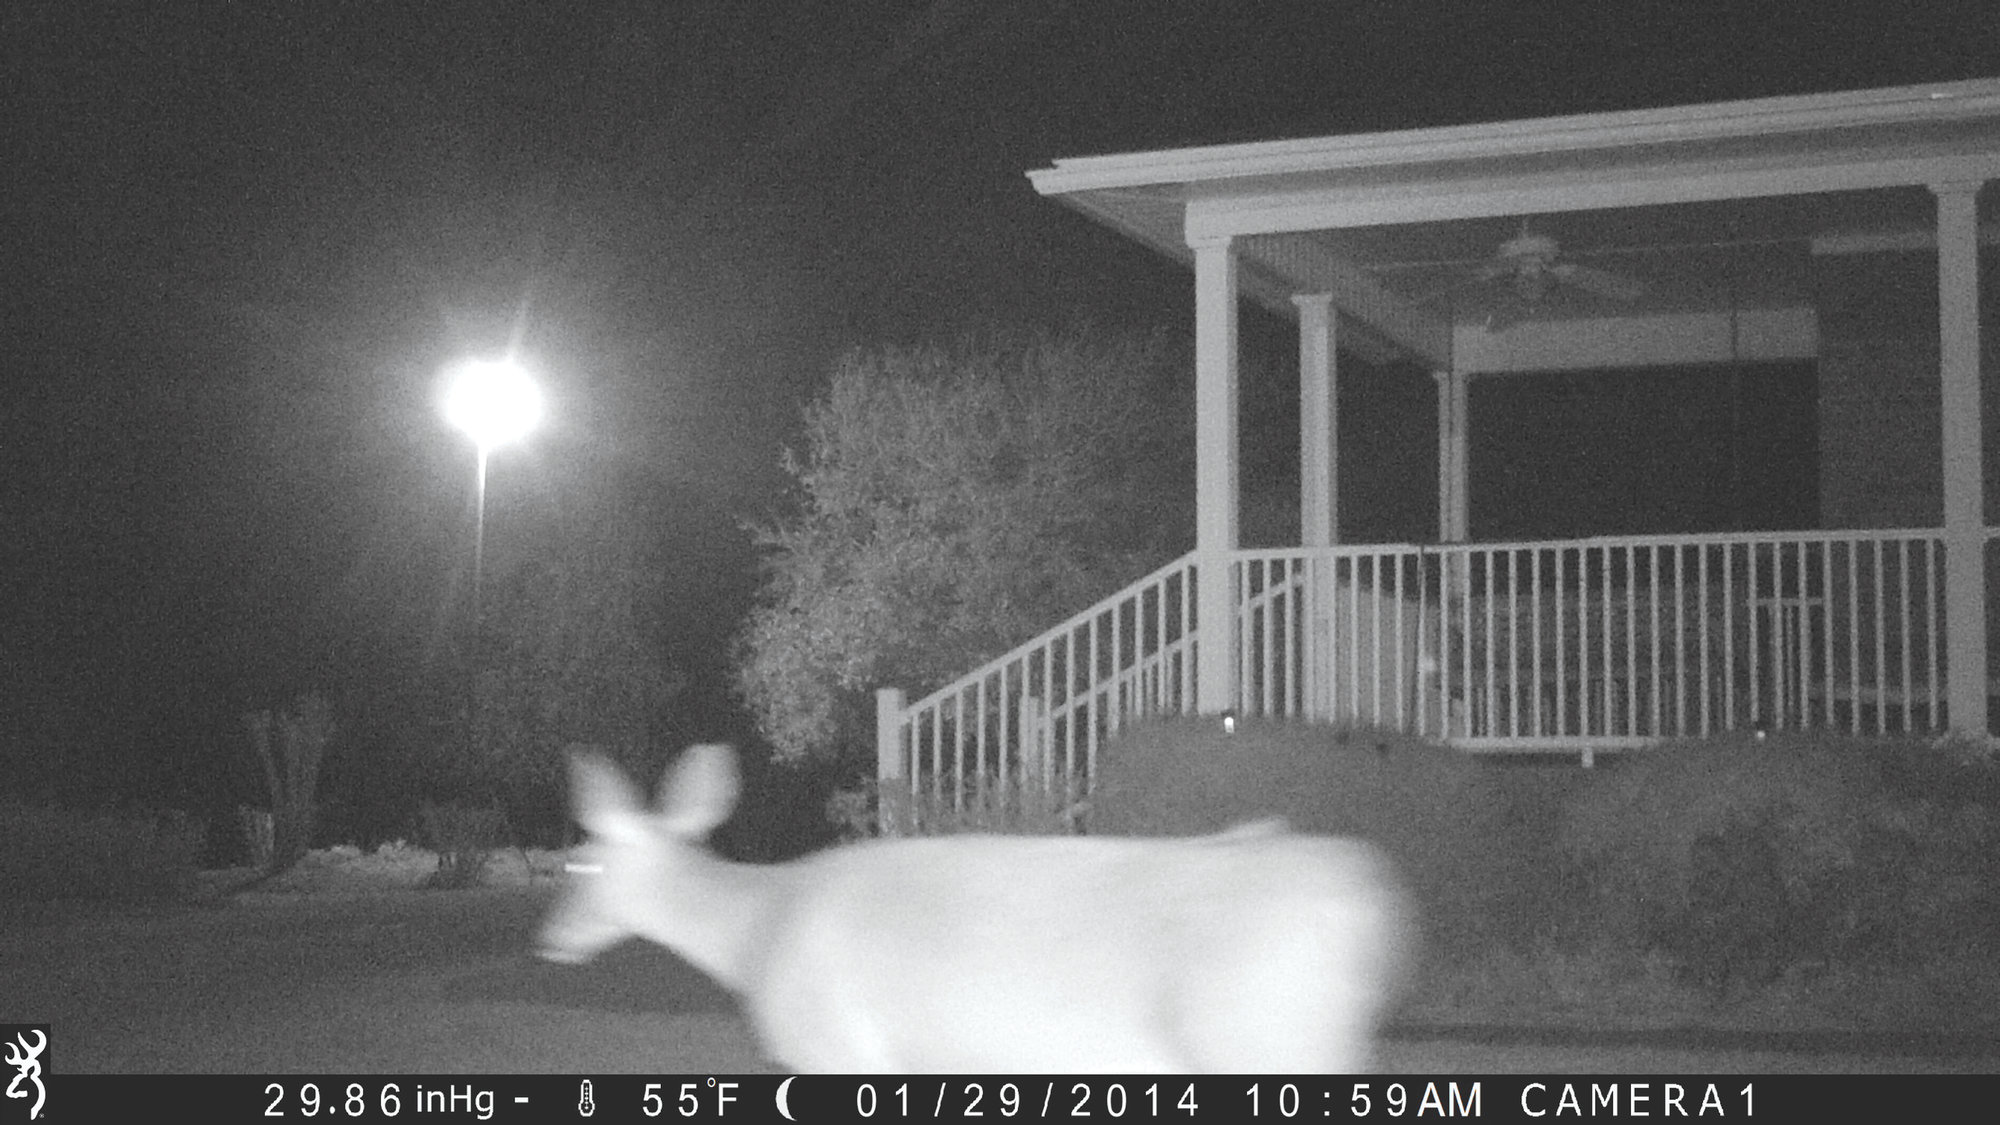 I placed a game camera in my father-in-law's flower bed 10 steps from his porch. The doe is a little blurry because she is trotting between the camera and his house.